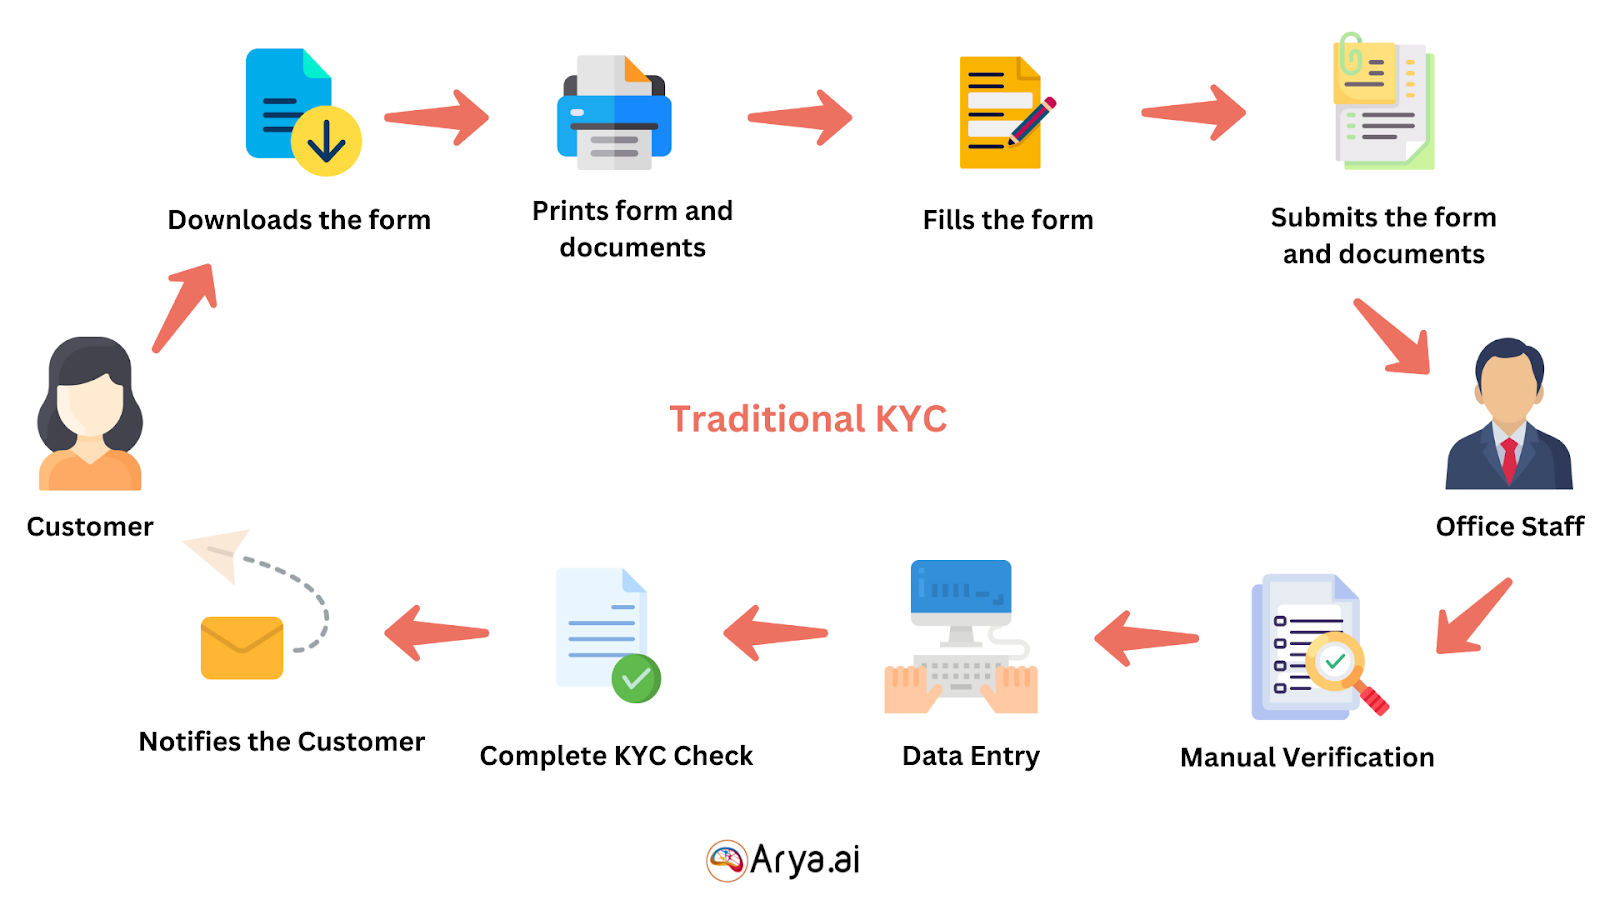 How KYC Automation Can Enhance Customer Onboarding Experience